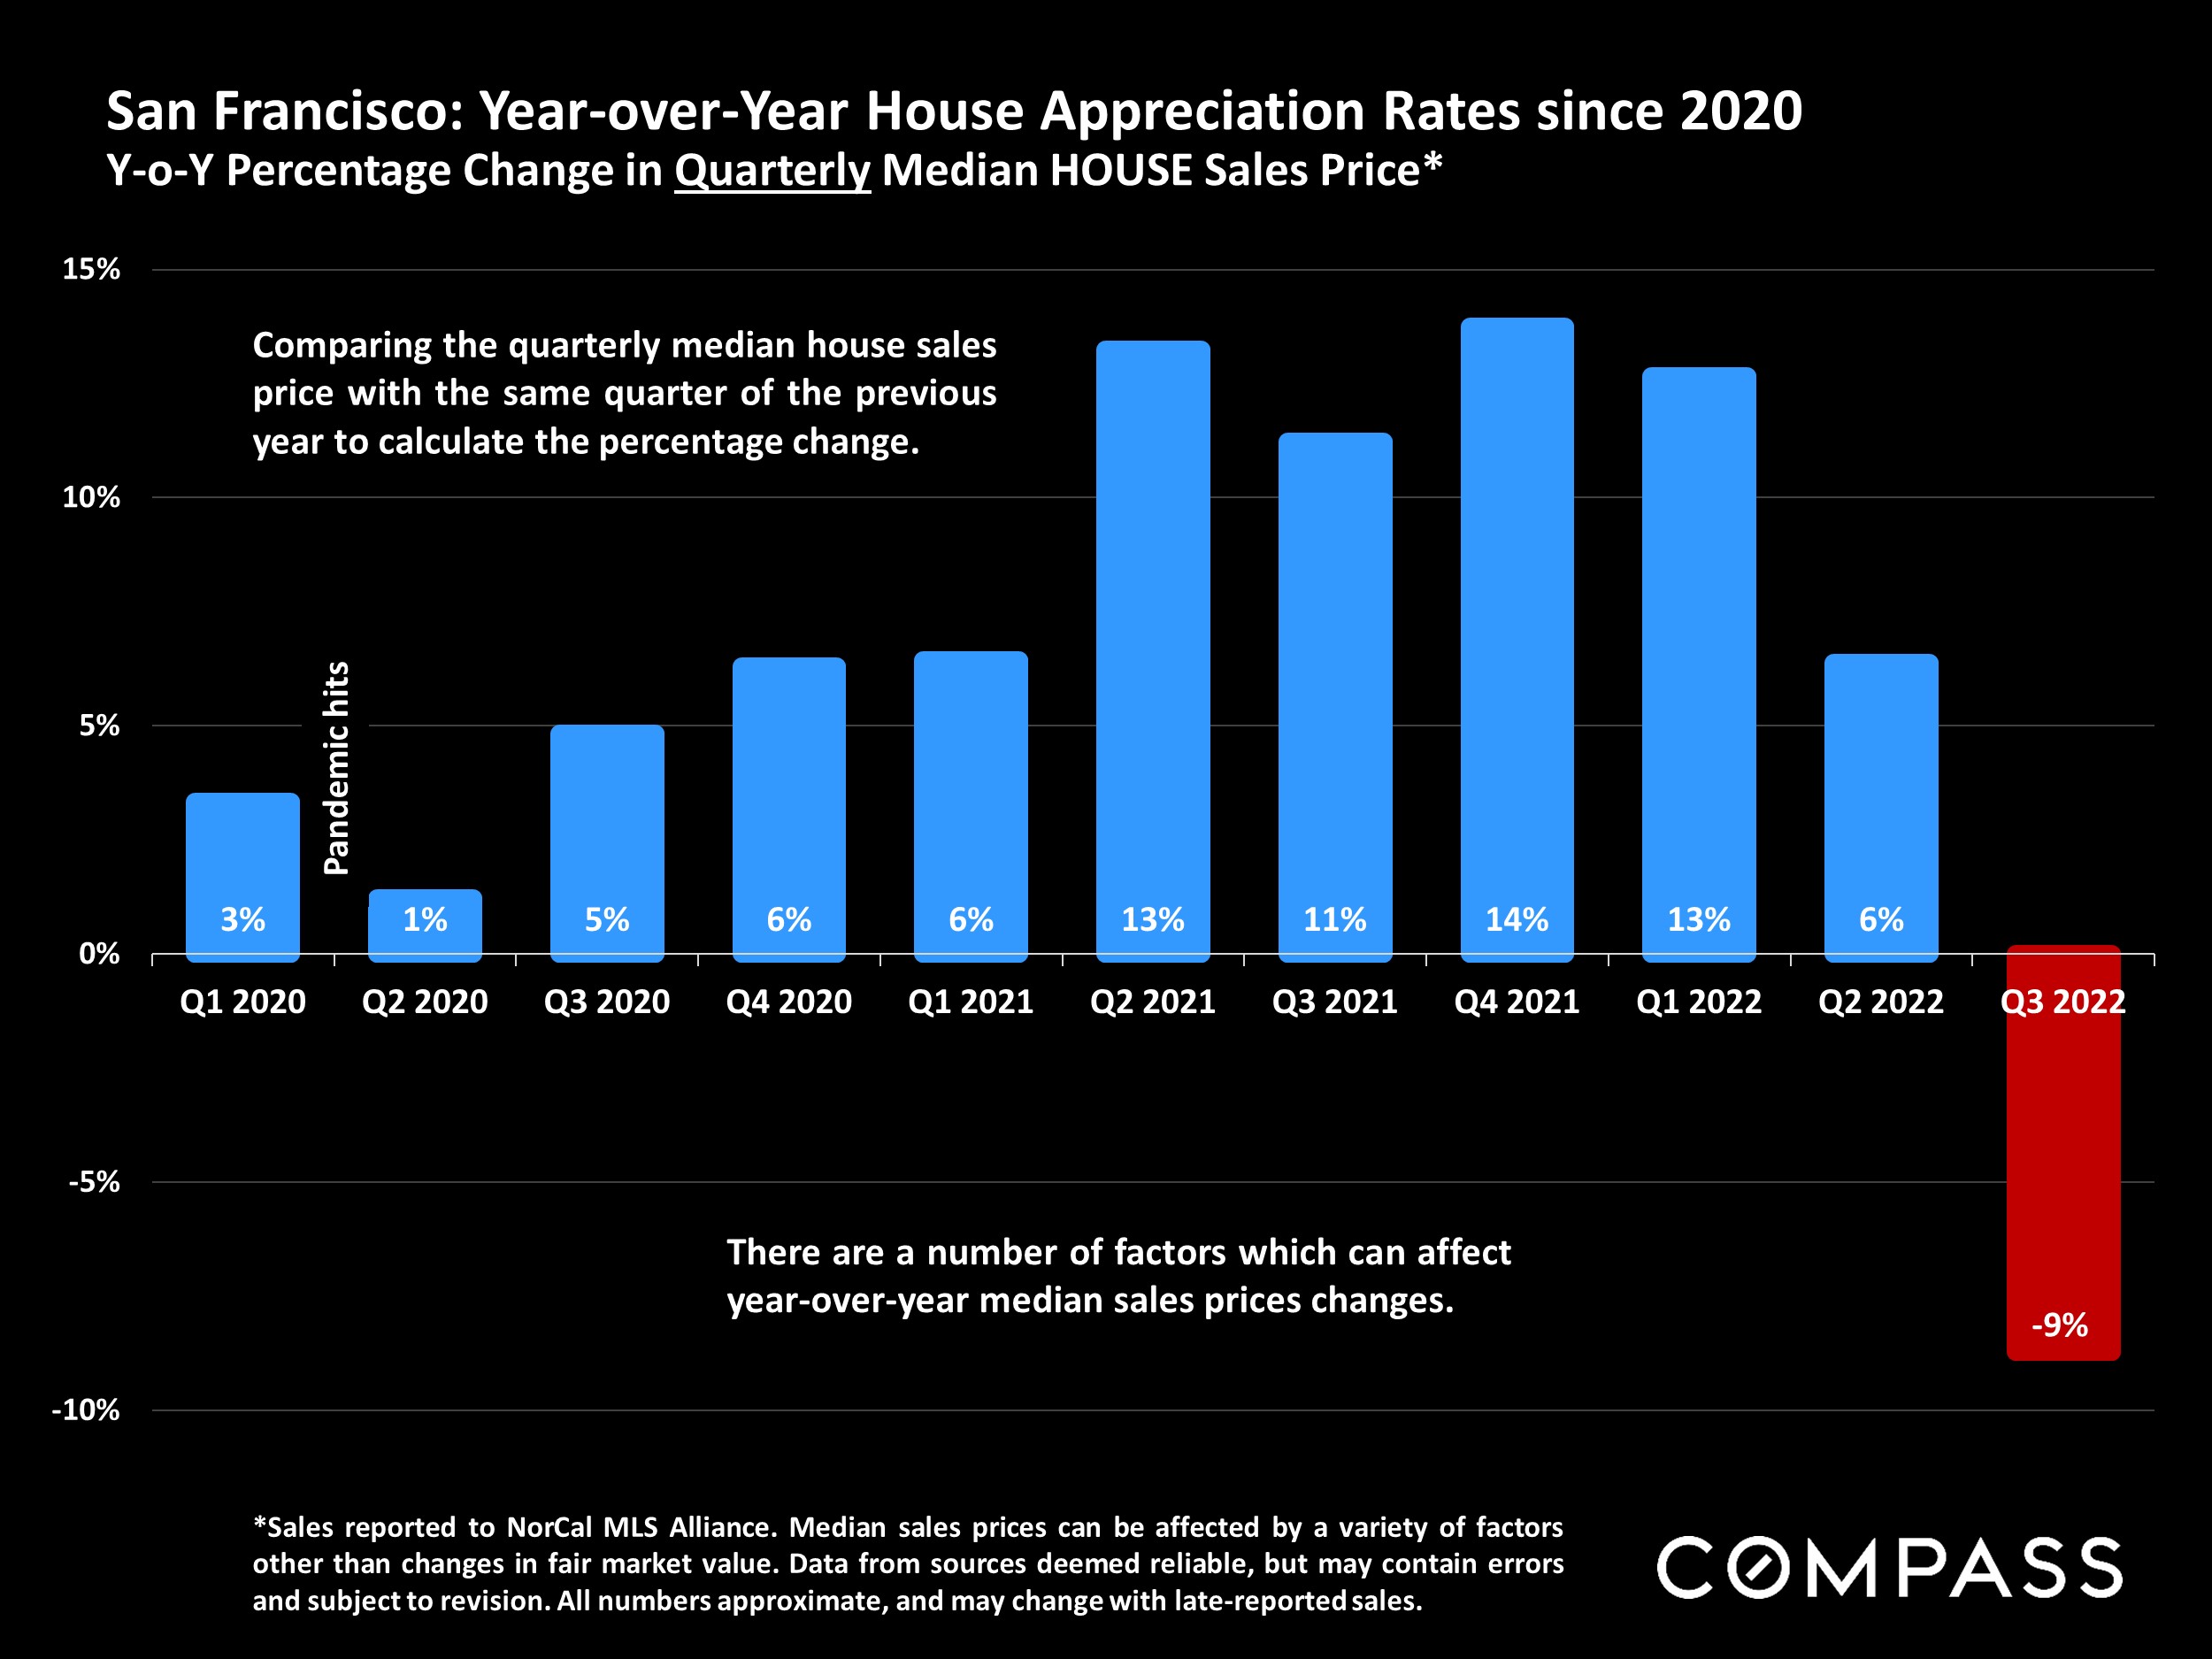 San Francisco: Year-over-Year House Appreciation Rates since 2020